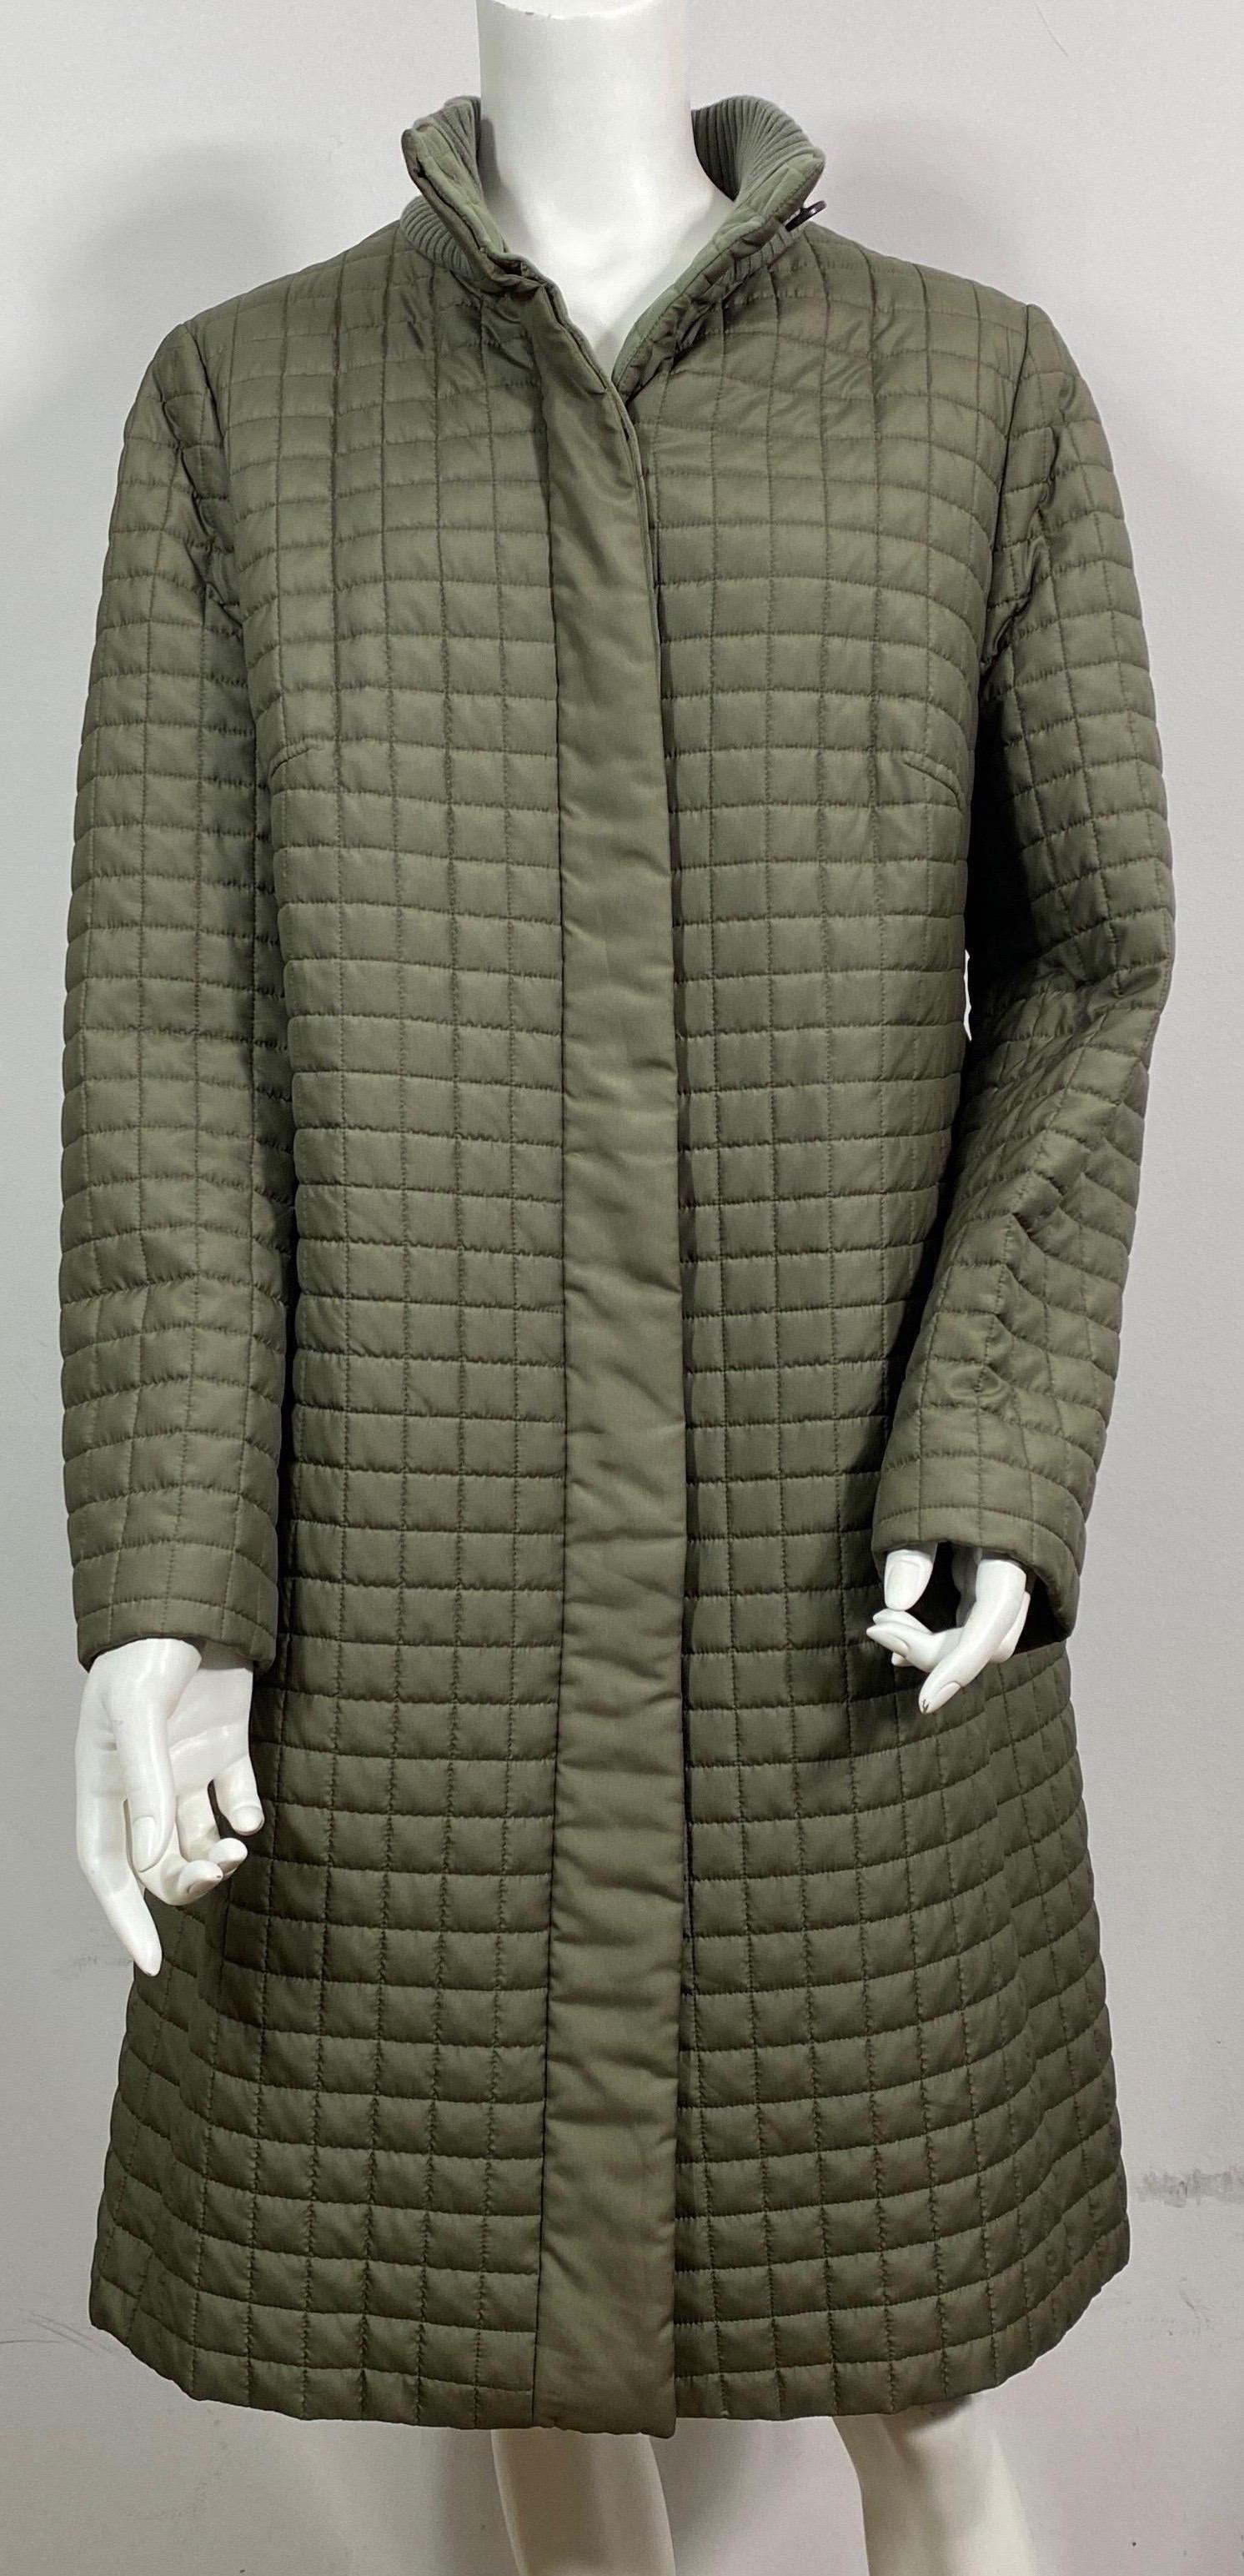 Akris Sage Silk Quilted Puffer Coat-Size 48 This 1990’s quilted silk puffer coat is marked a 48 (16 US), however I do believe the coat could fit more like a large and even possible a medium if it is meant to be worn over sweaters, etc. It has an